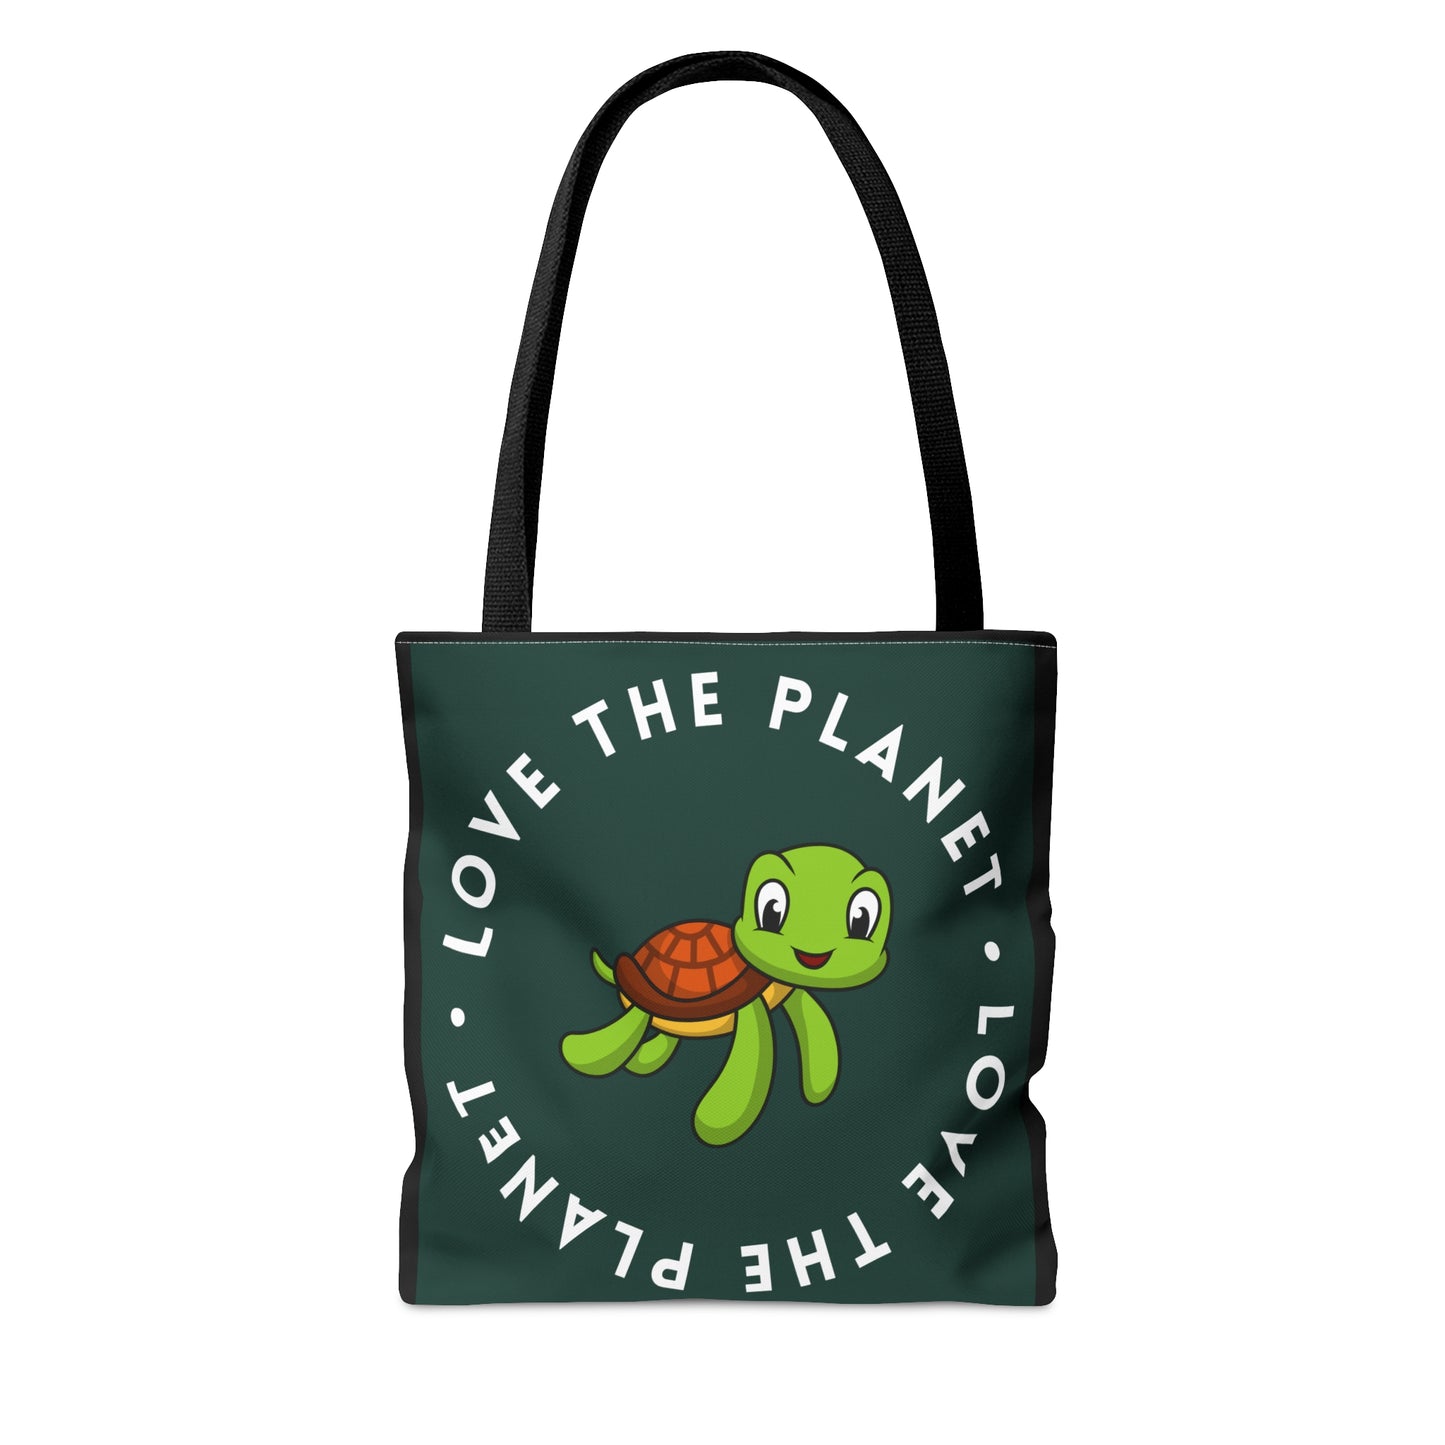 Adorable tortoise inside a  “LOVE THE PLANET” Tote Bag in 3 sizes to meet your needs.